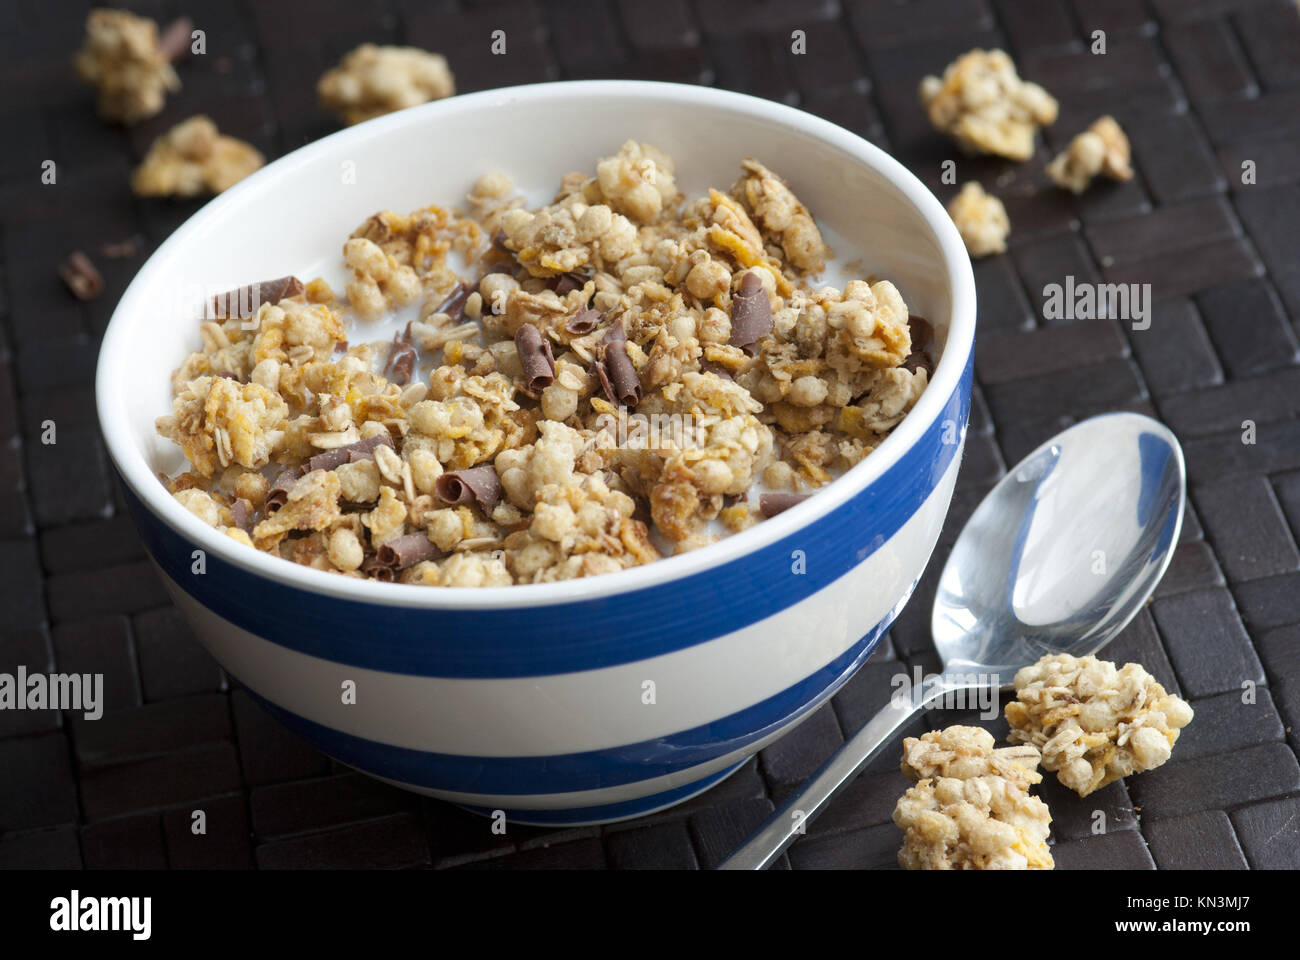 Crunchy nut clusters with chocolate chips in a bowl Stock Photo - Alamy